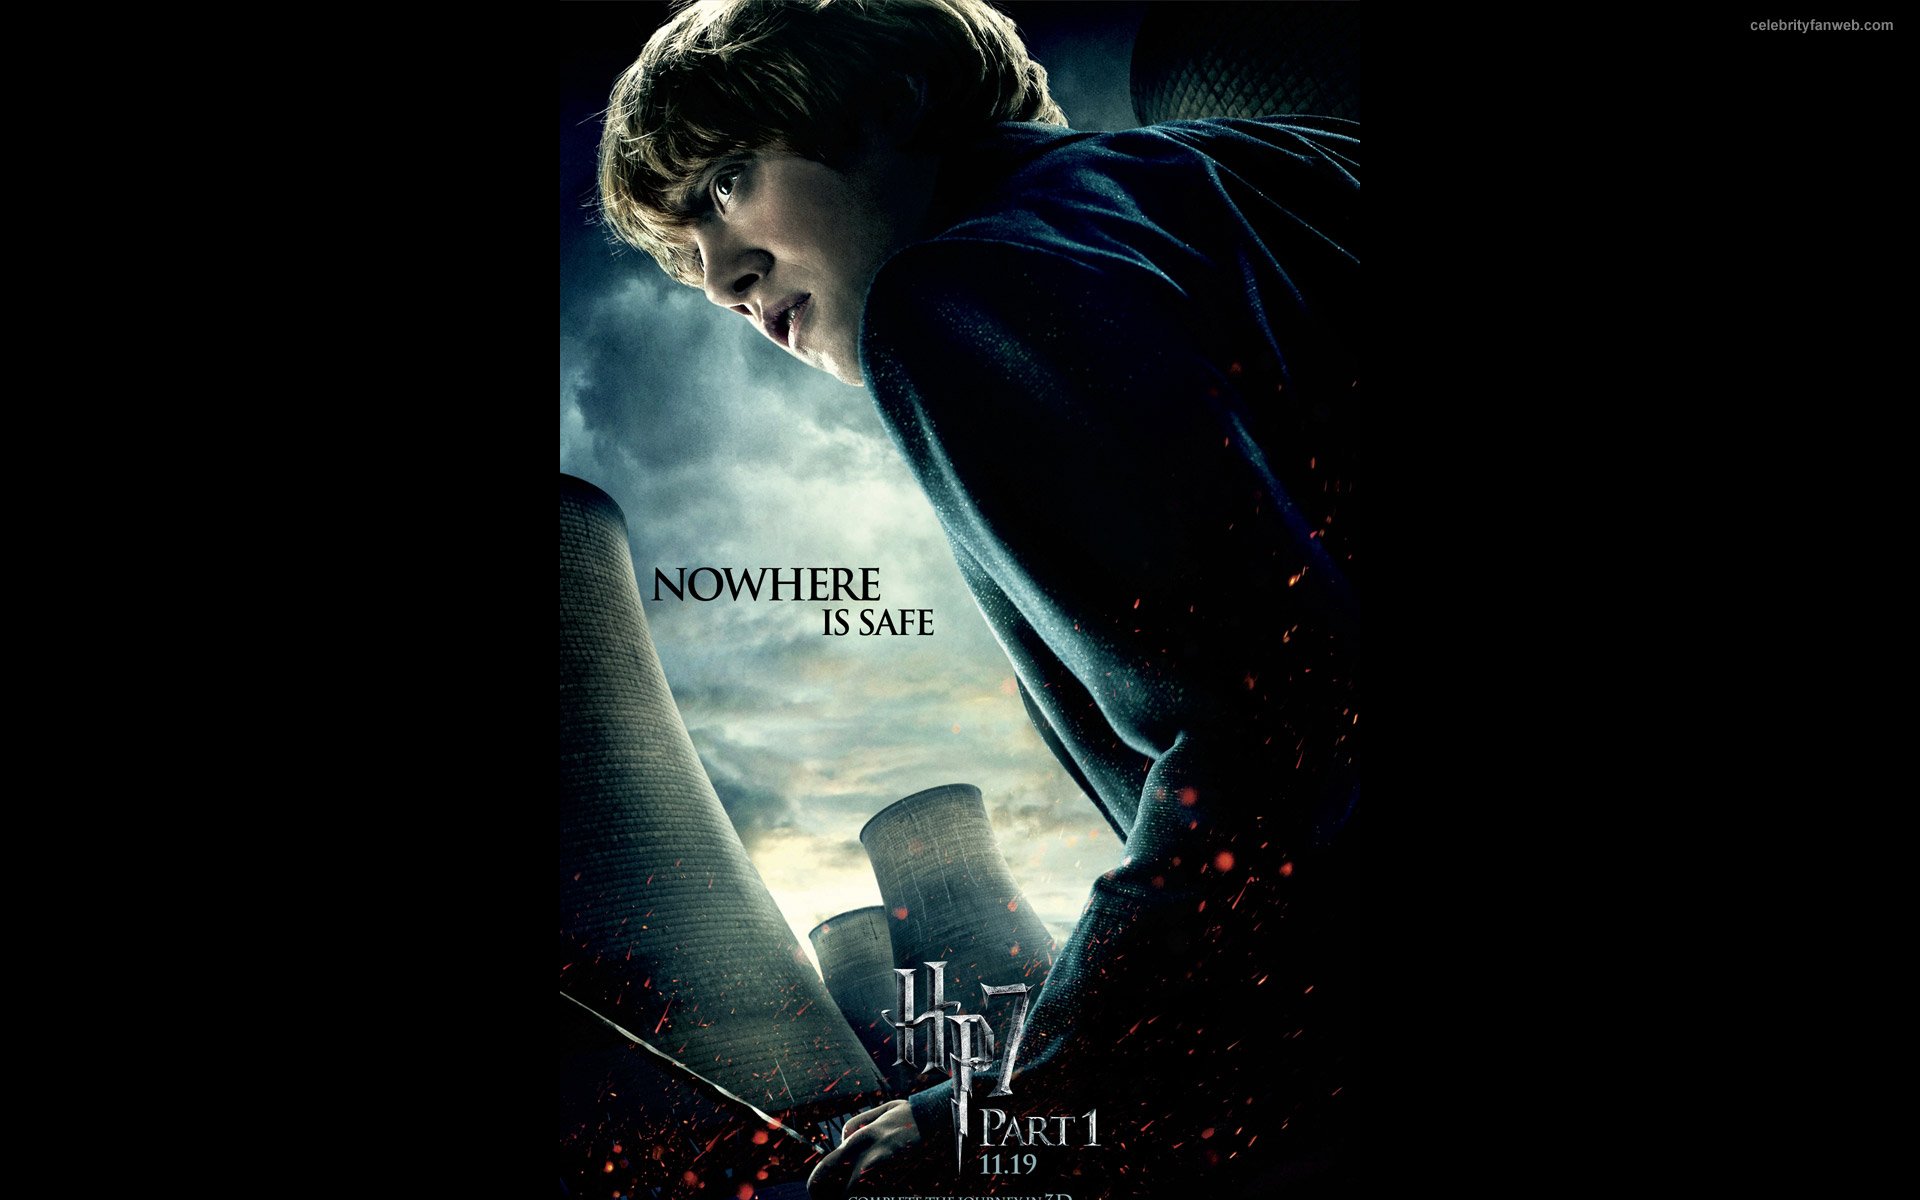 harry potter and the deathly hallows posters synopsis harry potter and